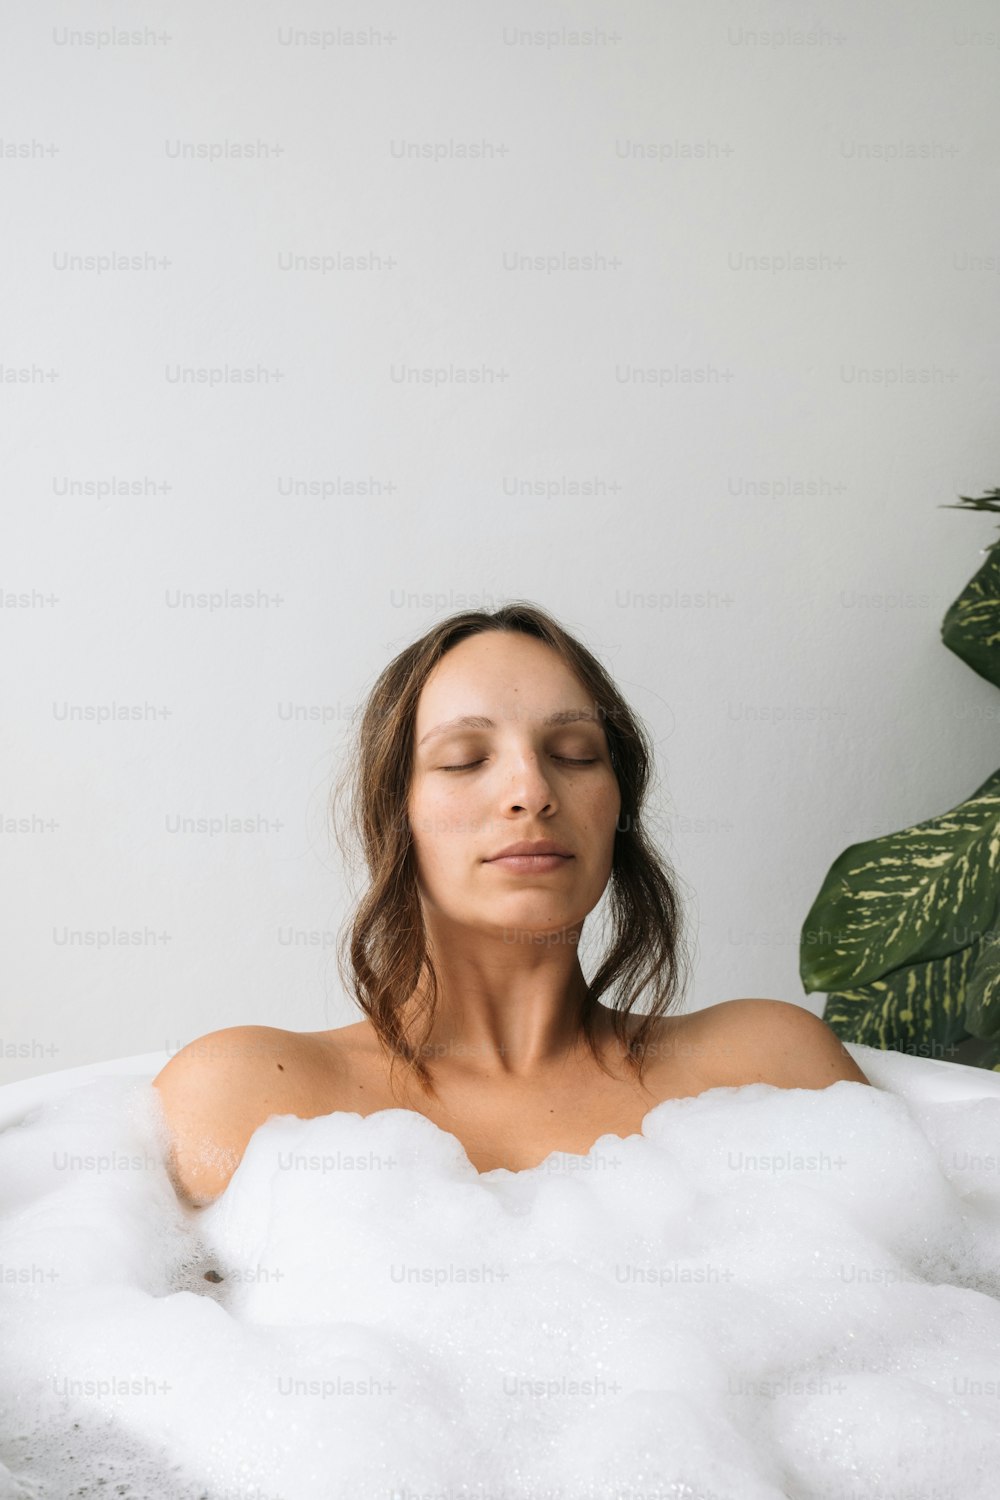 a woman sitting in a bubble bath with her eyes closed